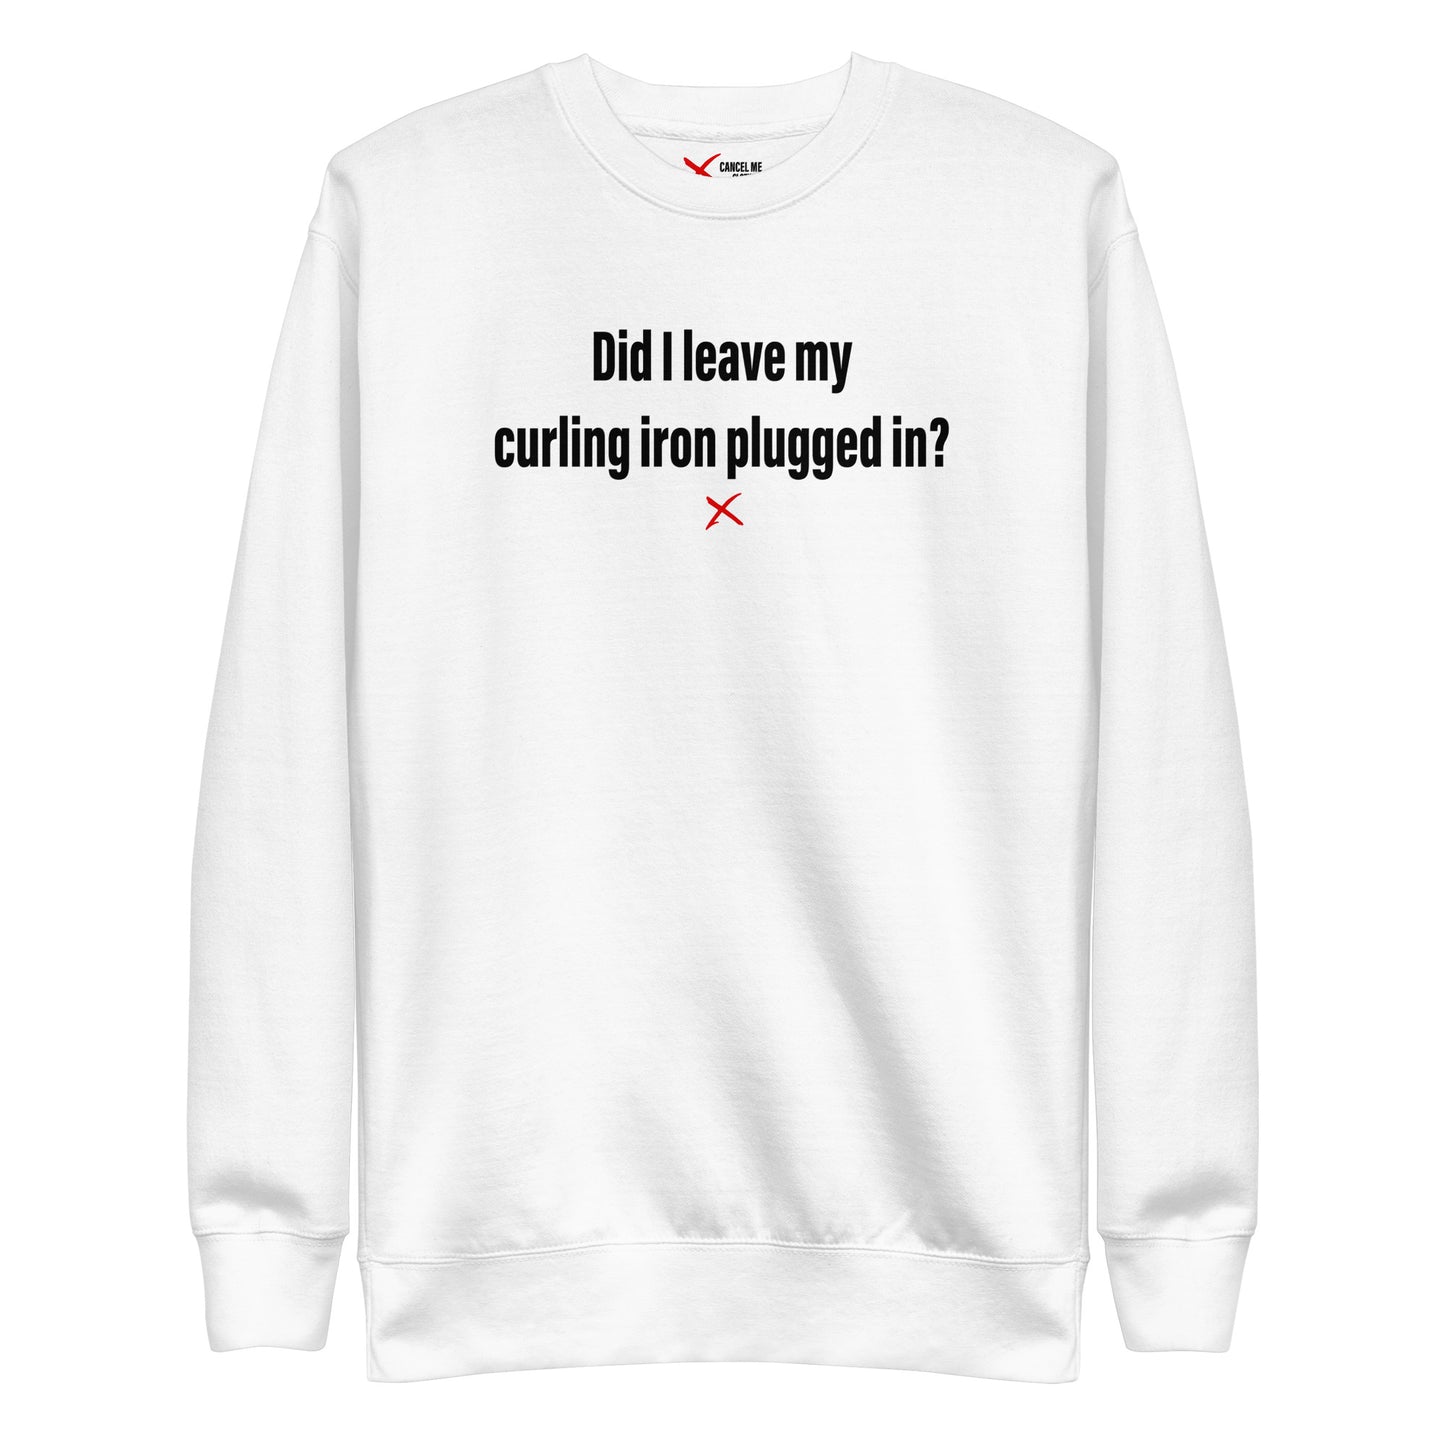 Did I leave my curling iron plugged in? - Sweatshirt